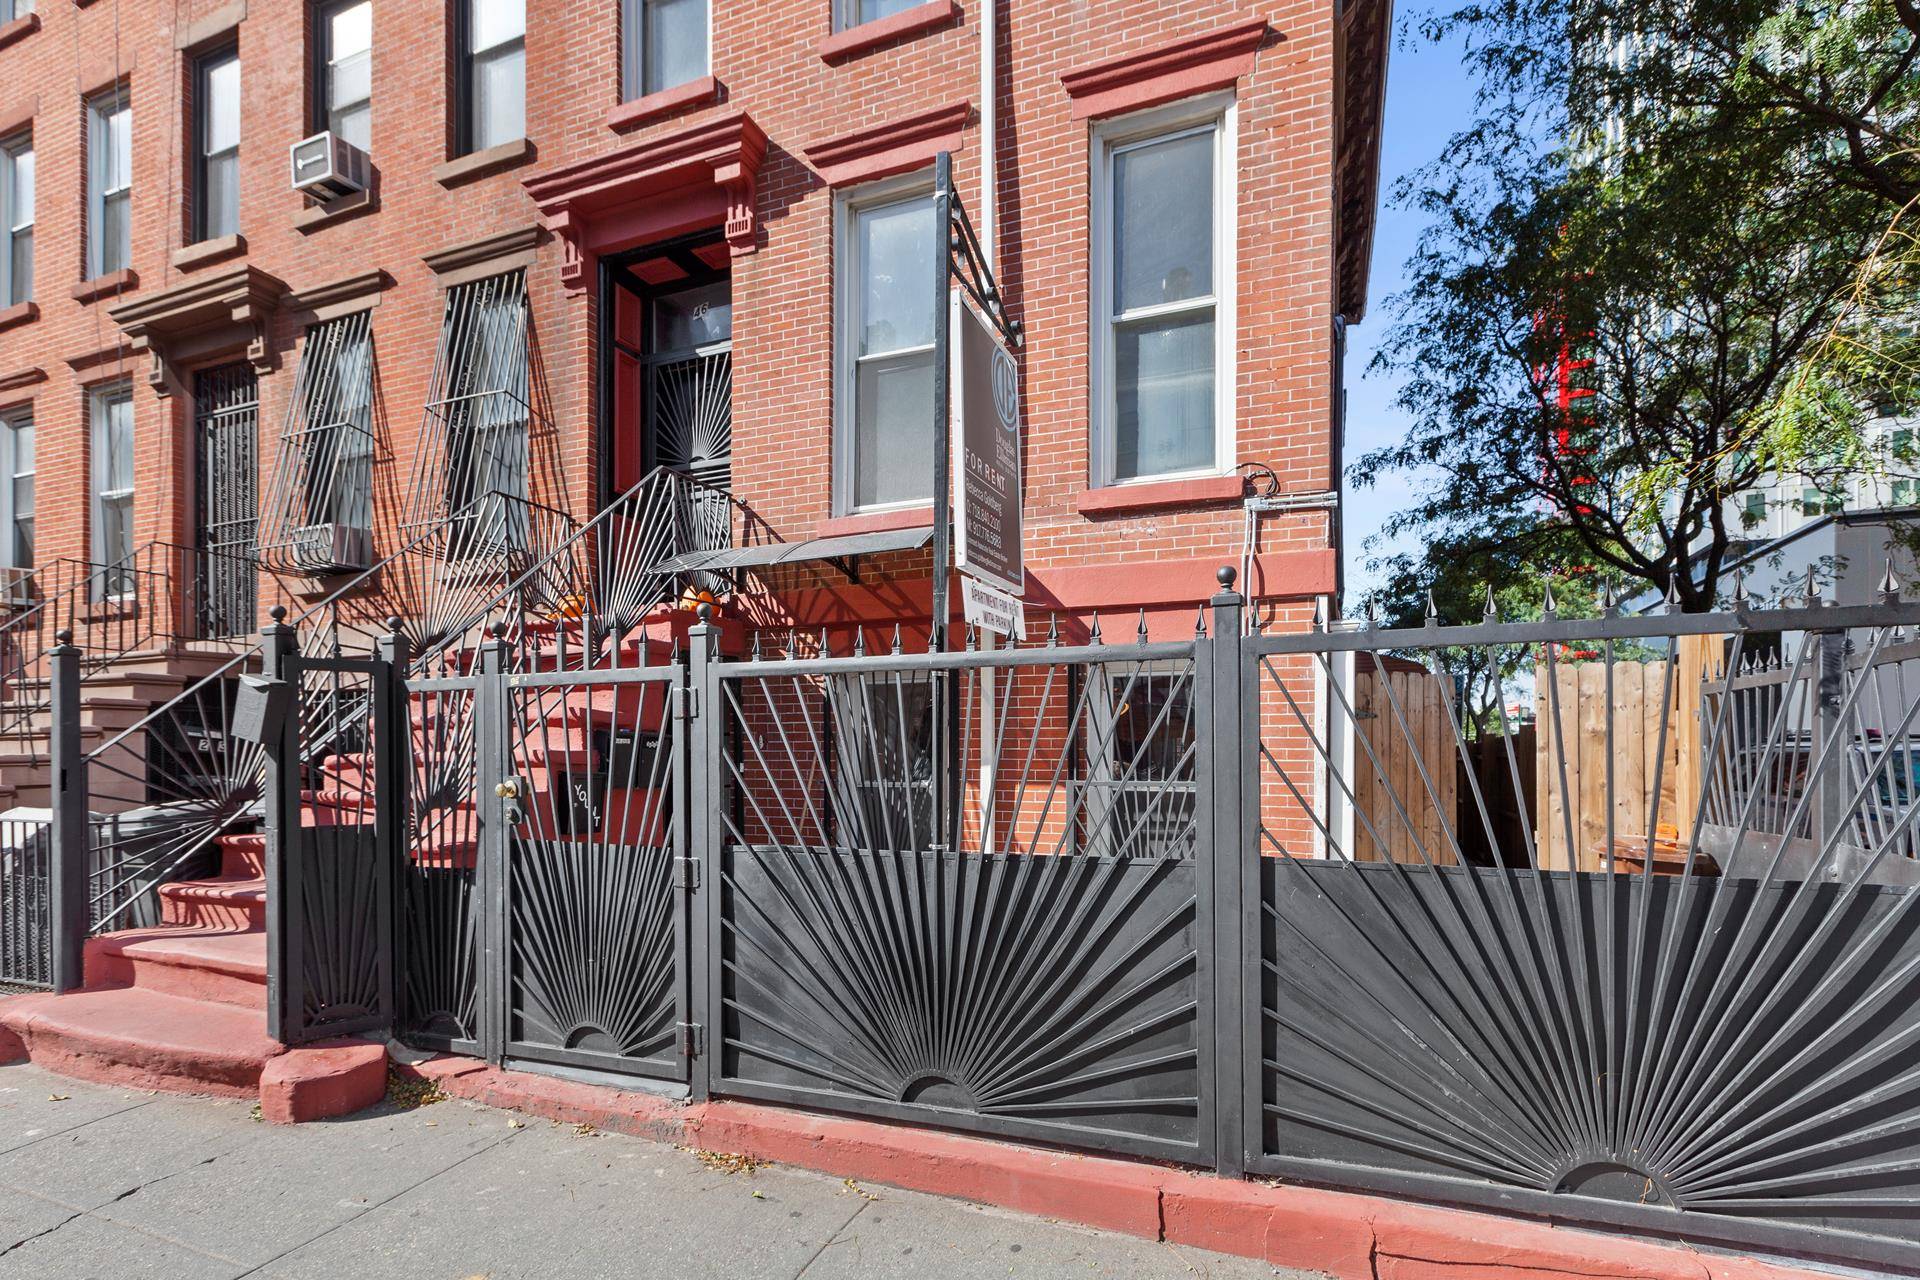 PARK SLOPE PROSPECT HEIGHTS PRIME LOCATION NEWLY RENOVATED BROWNSTONE TOWNHOUSE Big and beautiful home for rent.